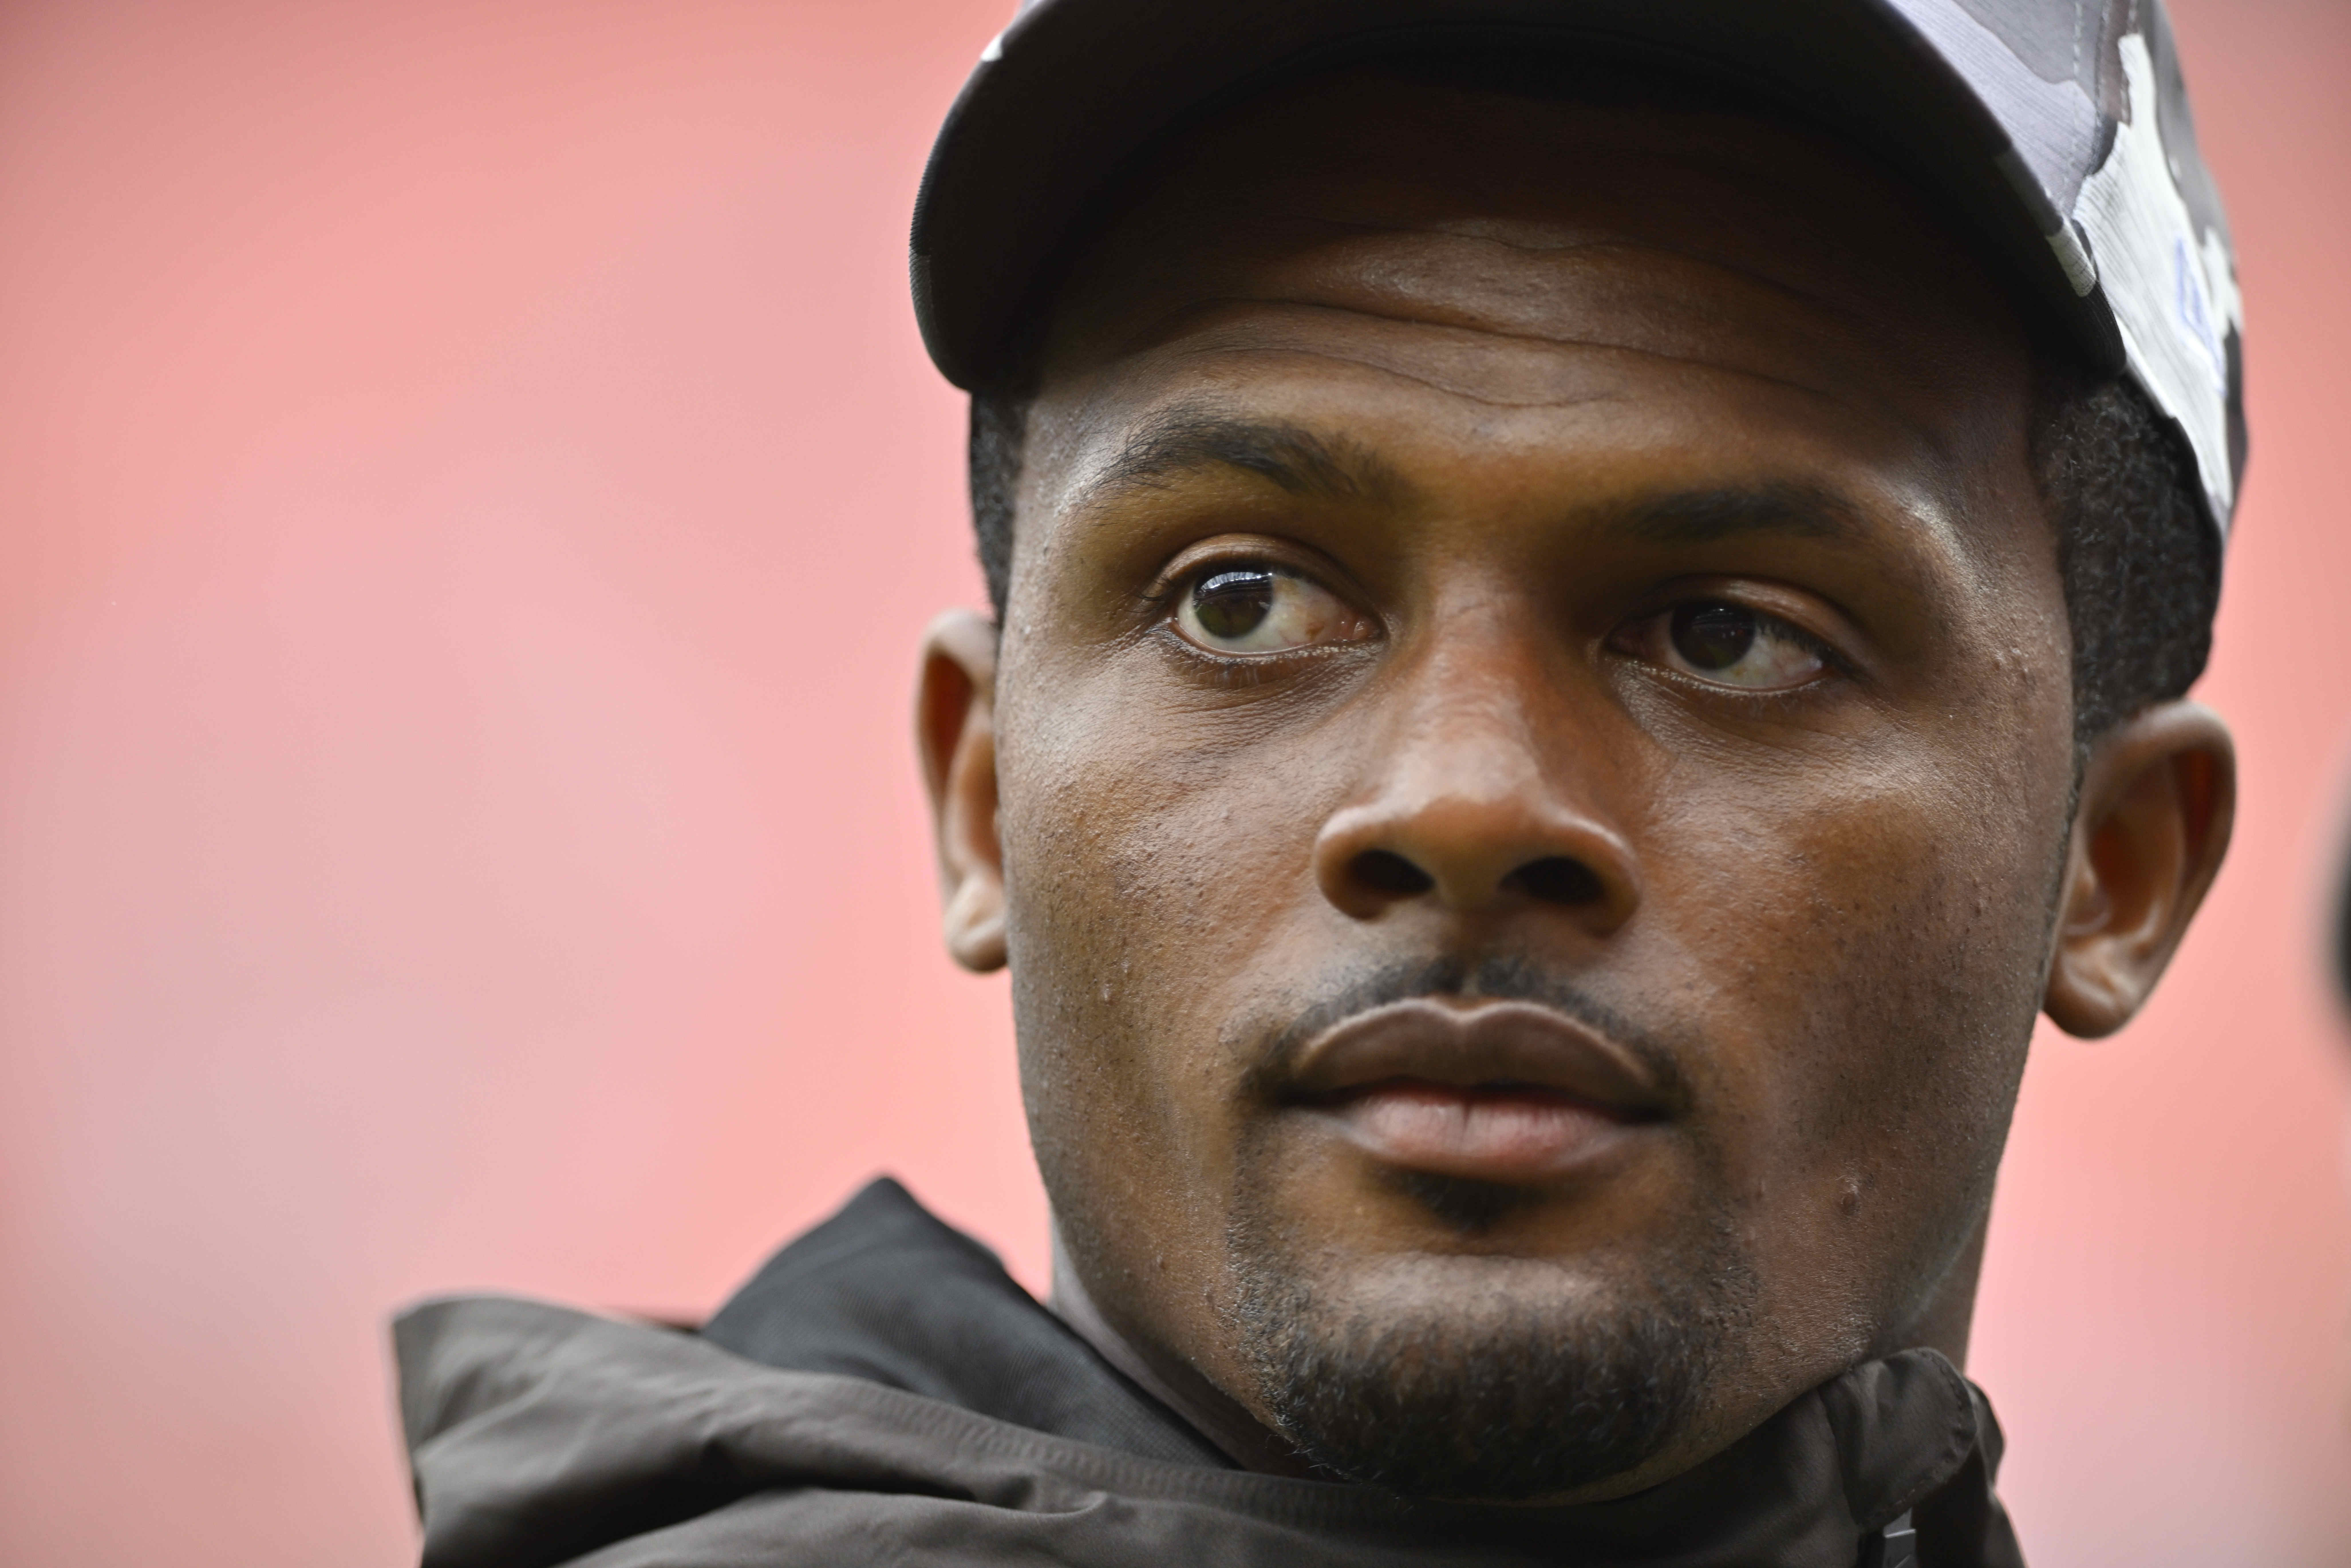 Browns starting QB: Who will start at quarterback with Deshaun Watson  suspended? - DraftKings Network